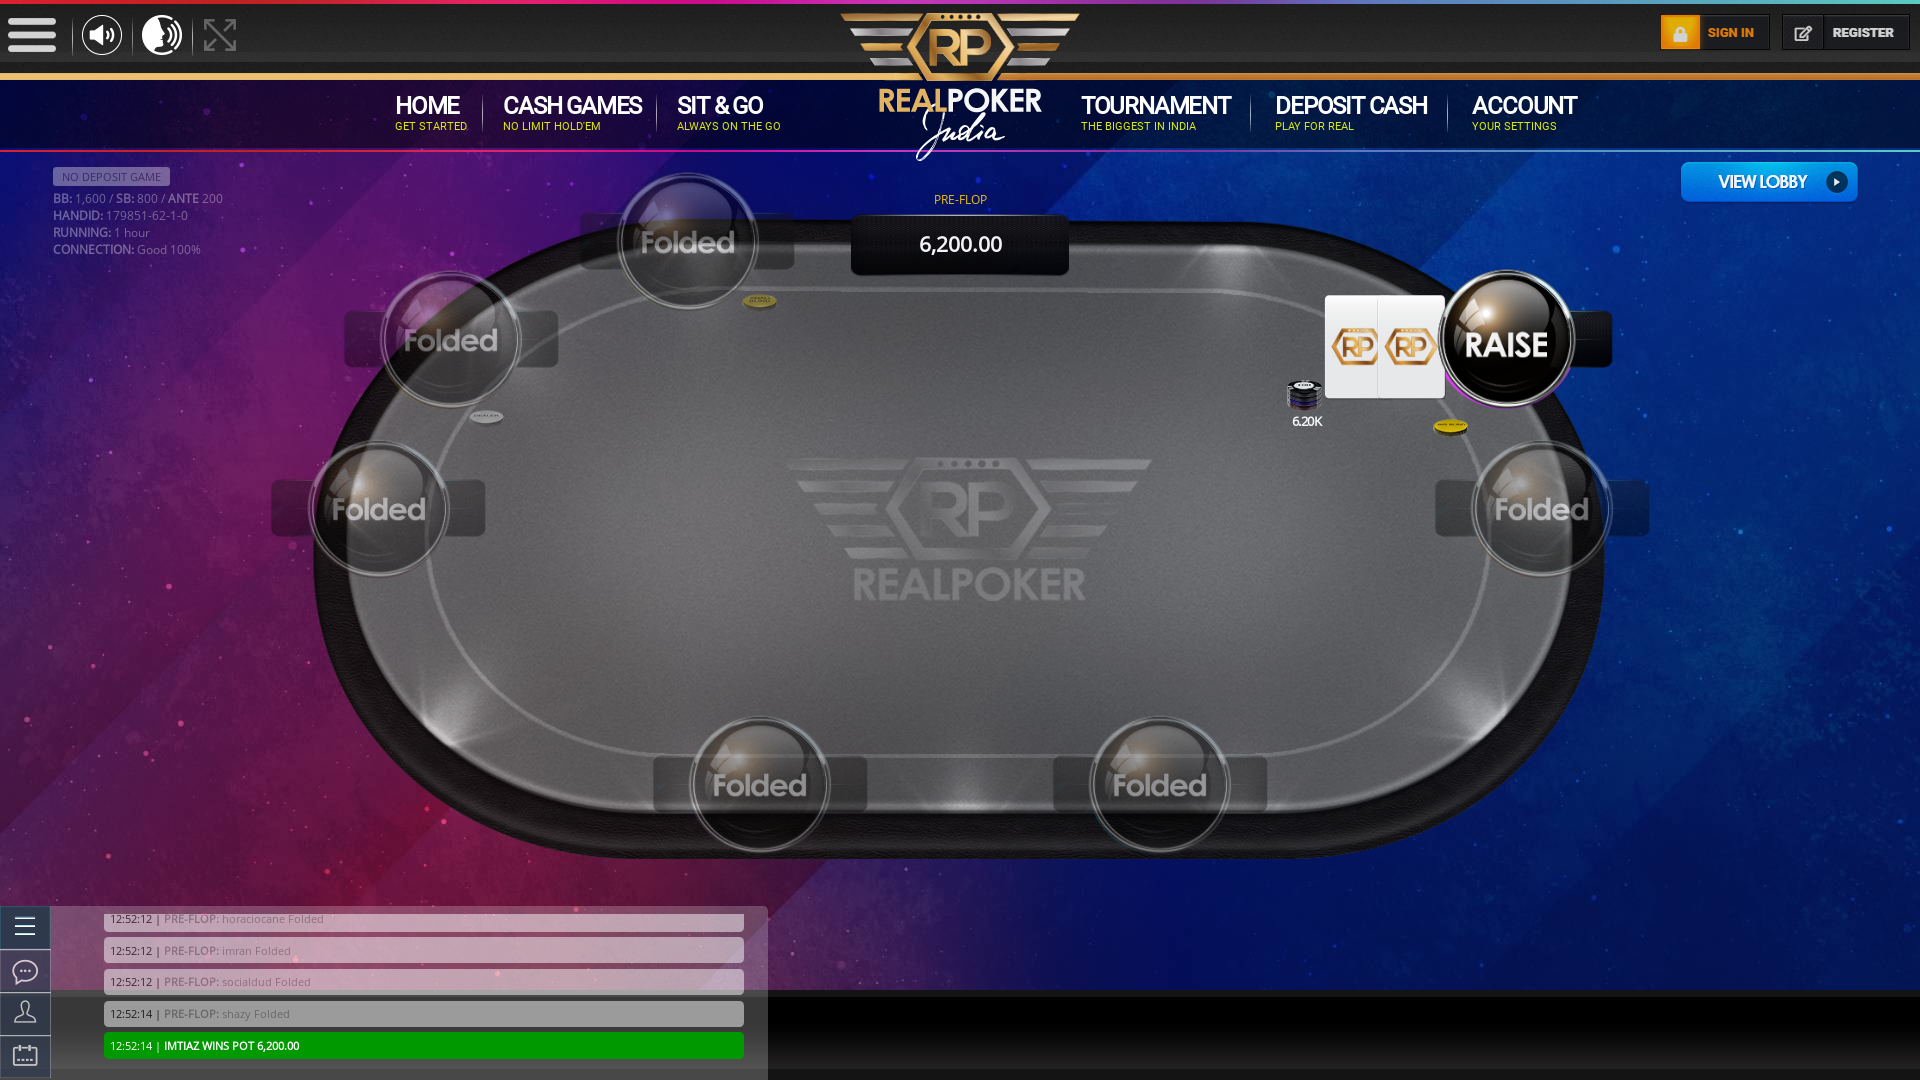 10 player texas holdem table at real poker with the table id 179851